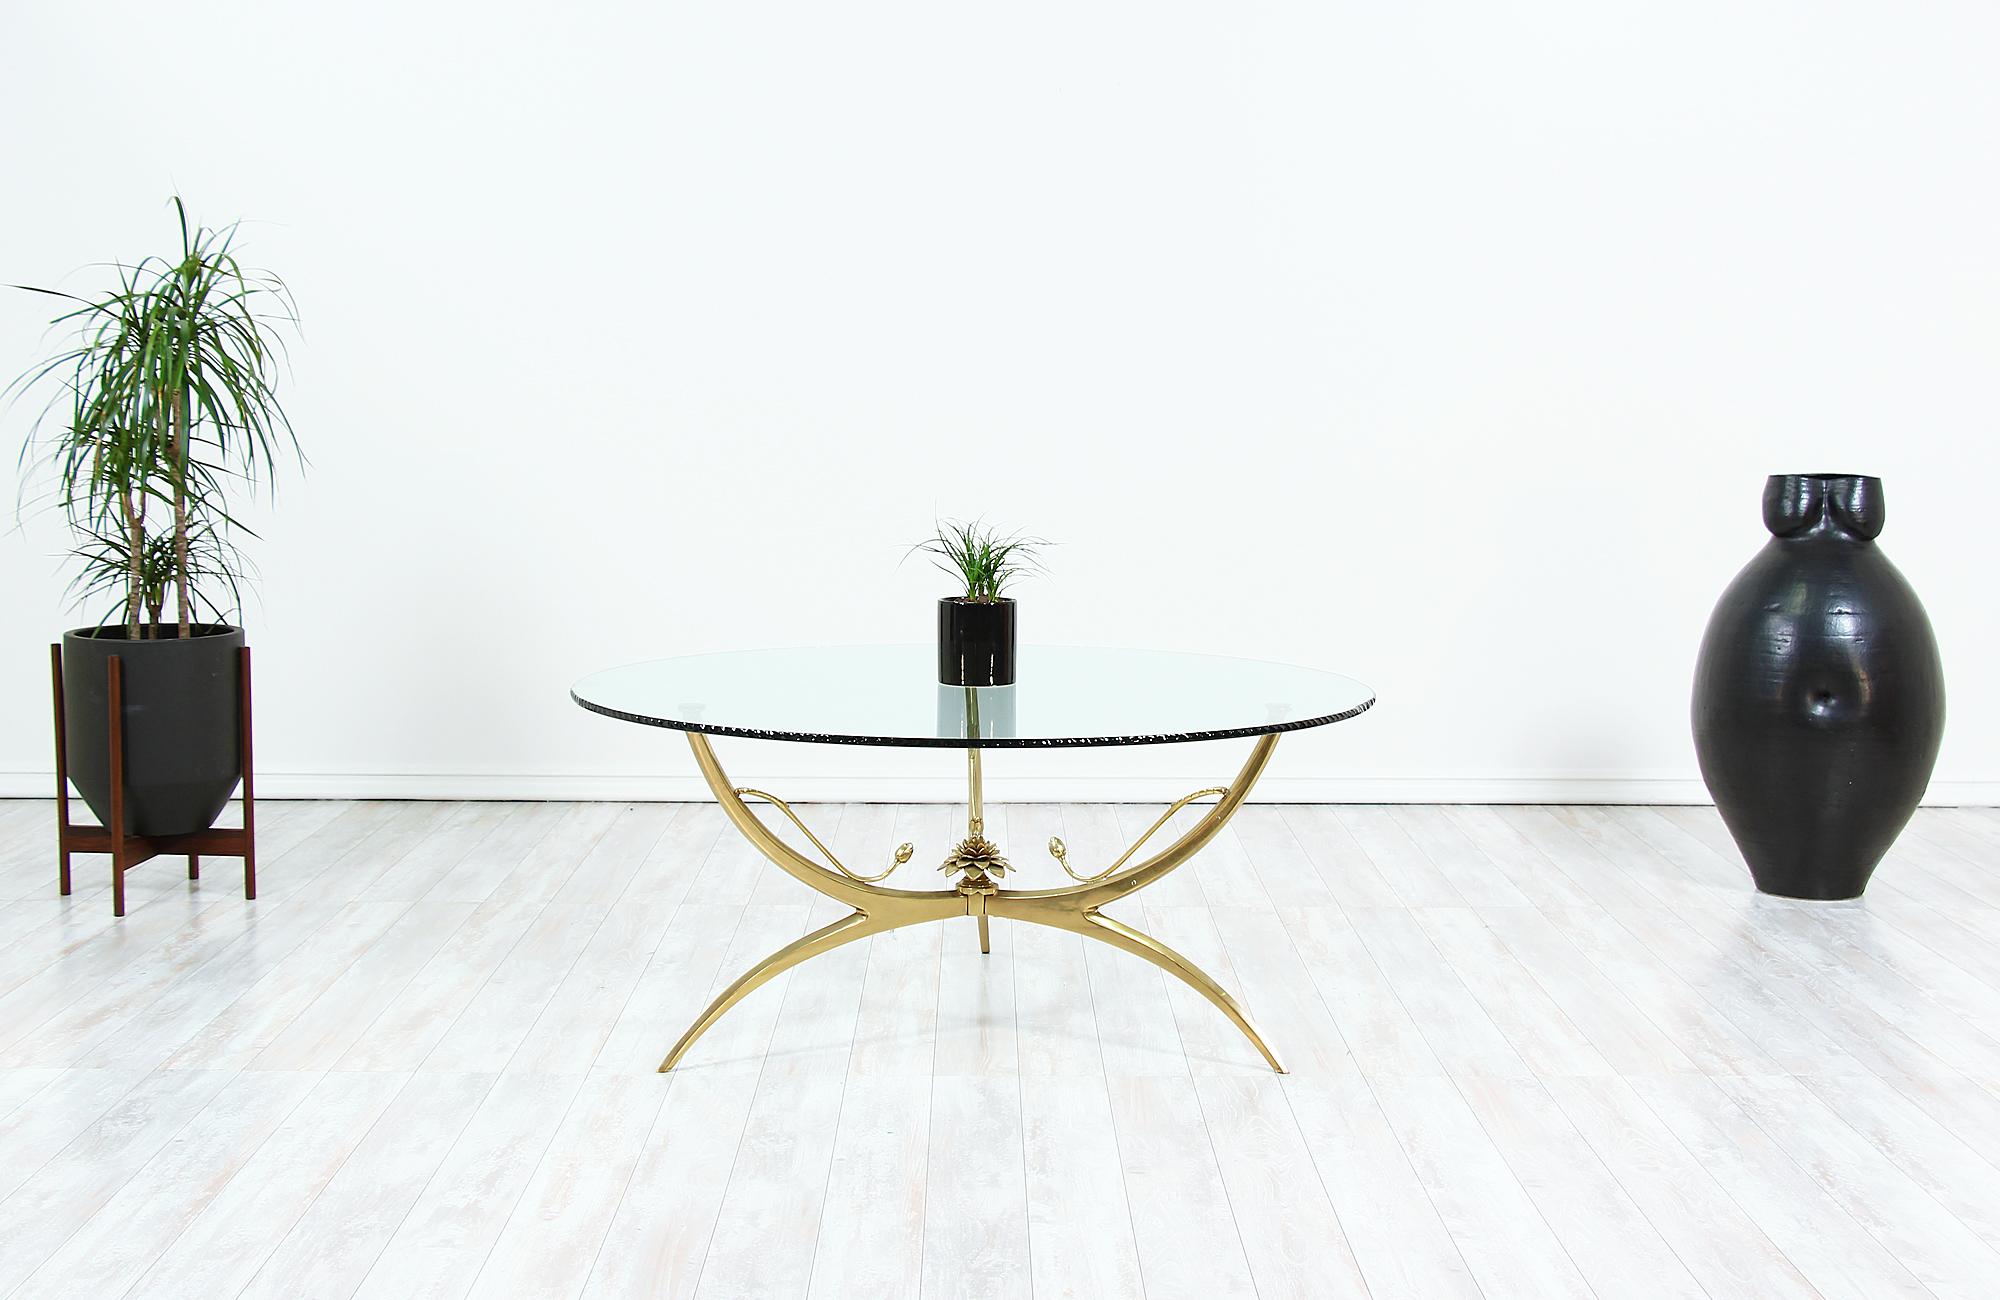 Elegant coffee table designed and manufactured in the United States, circa 1970s. This beautiful table features a lotus flower and bud motif in the center with three legs supporting the original glass top, which features an artistic wave-edge